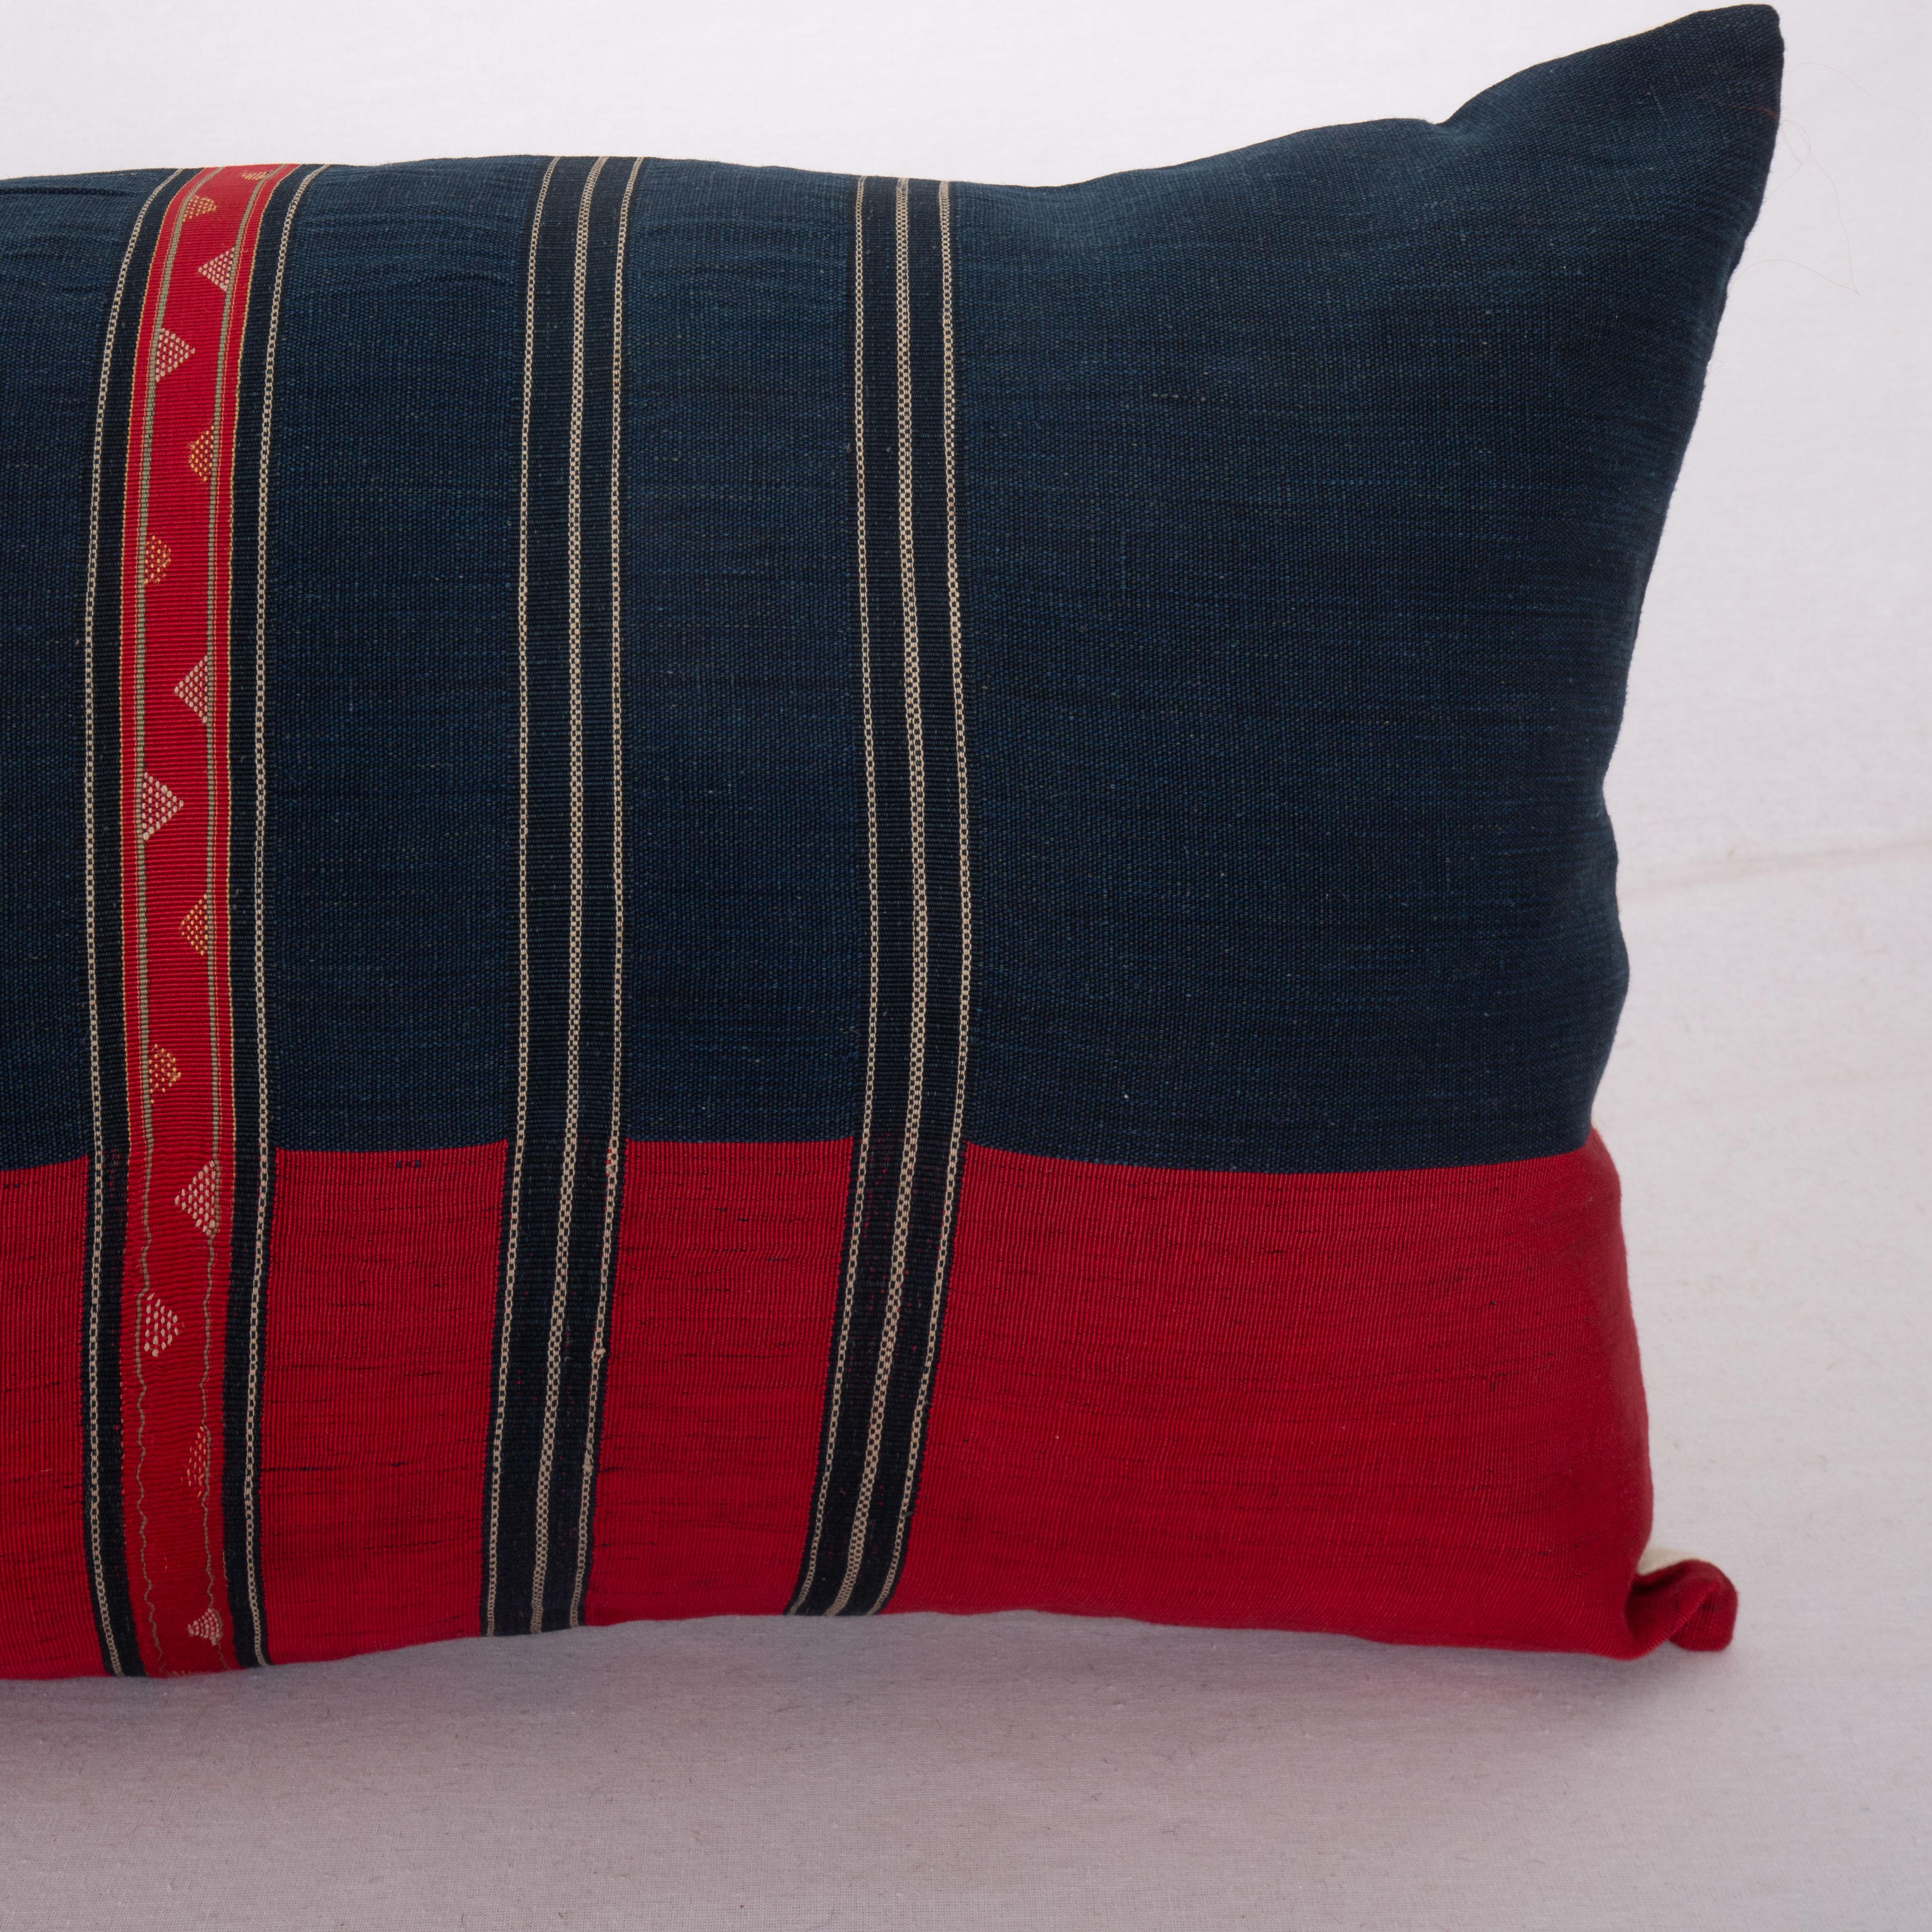 Hand-Woven Antique Silk and Cotton Waziri Shawl Pillow Cover, Afghanistan, Early 20th C For Sale